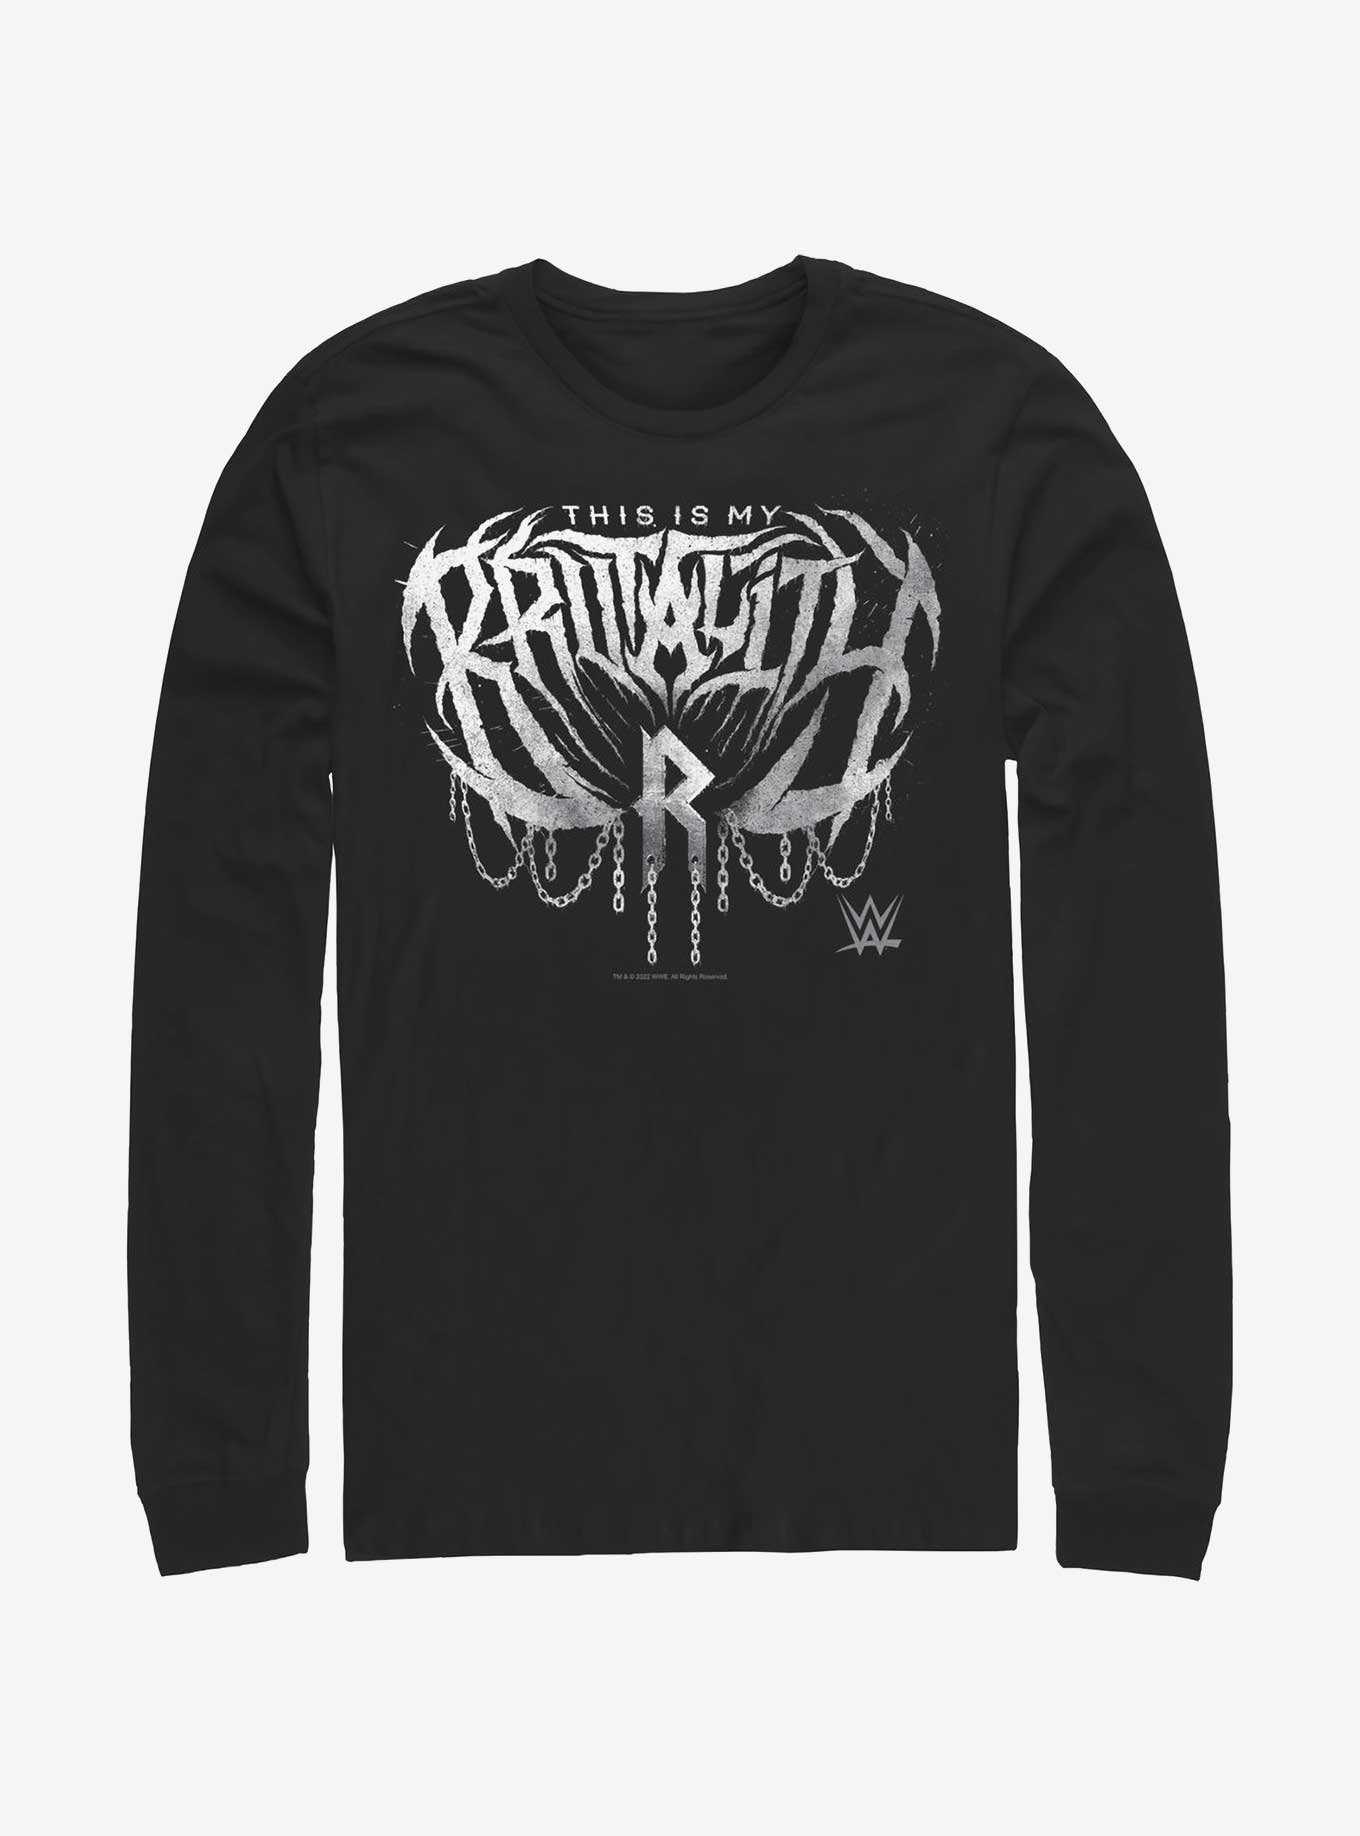 WWE Rhea Ripley This Is My Brutality Long-Sleeve T-Shirt, , hi-res